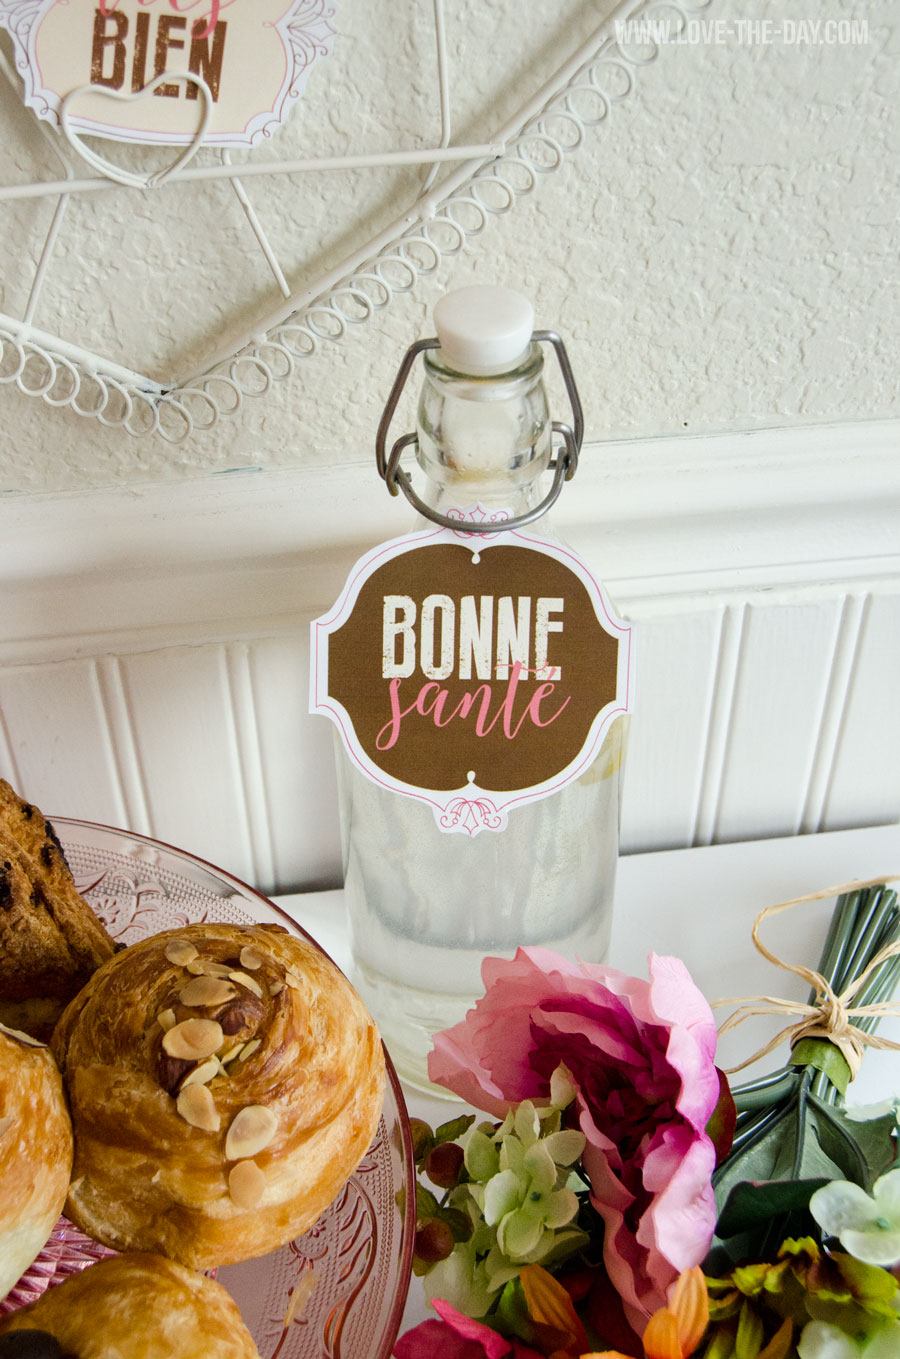 Paris Themed Party Decorations & FREE Printables by Love The Day